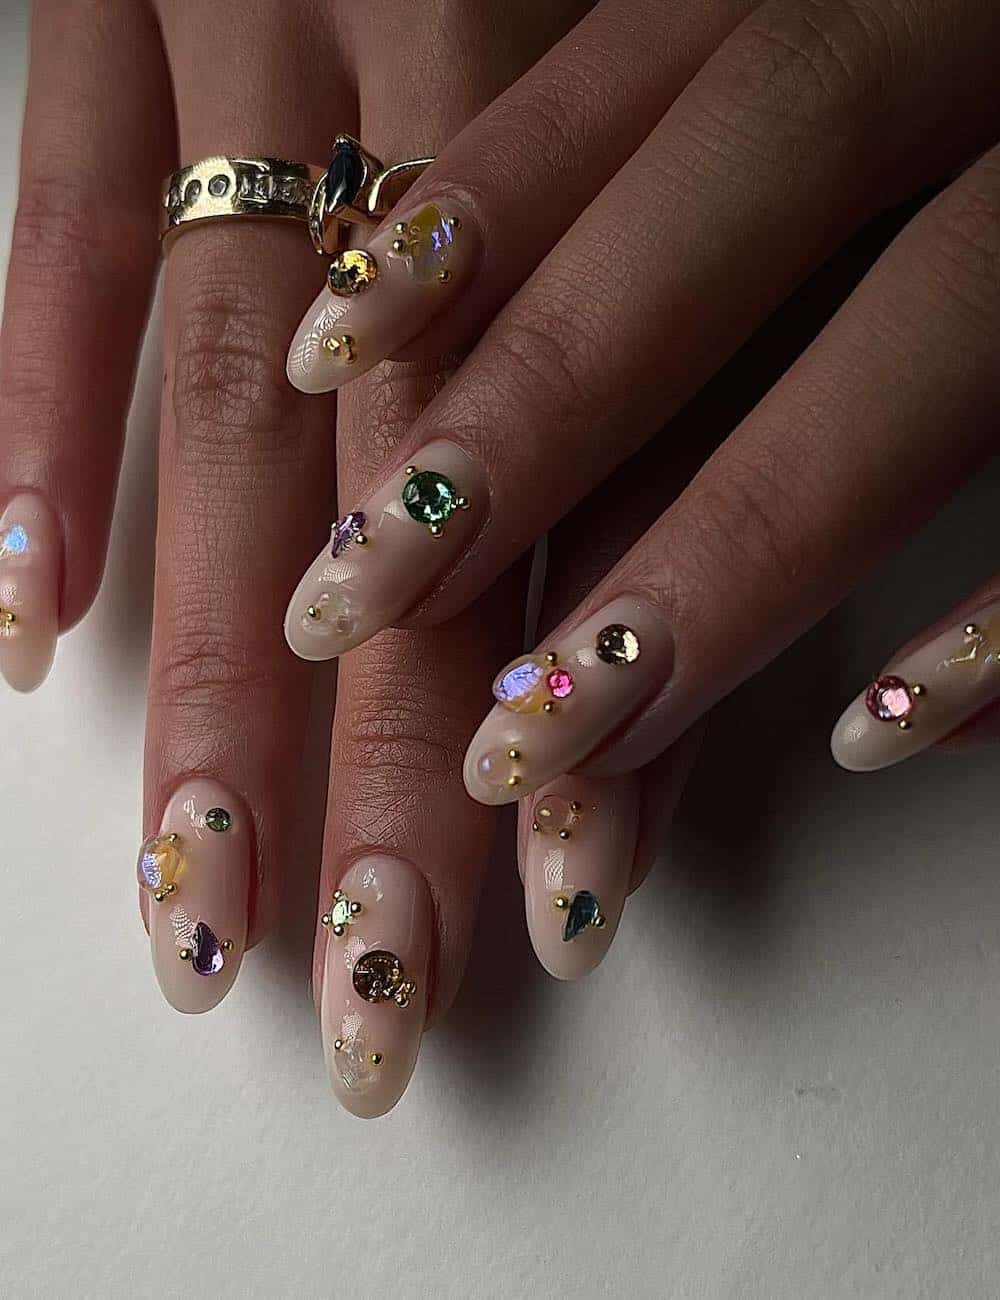 long round nude nails with gems, pearls, and gold charms